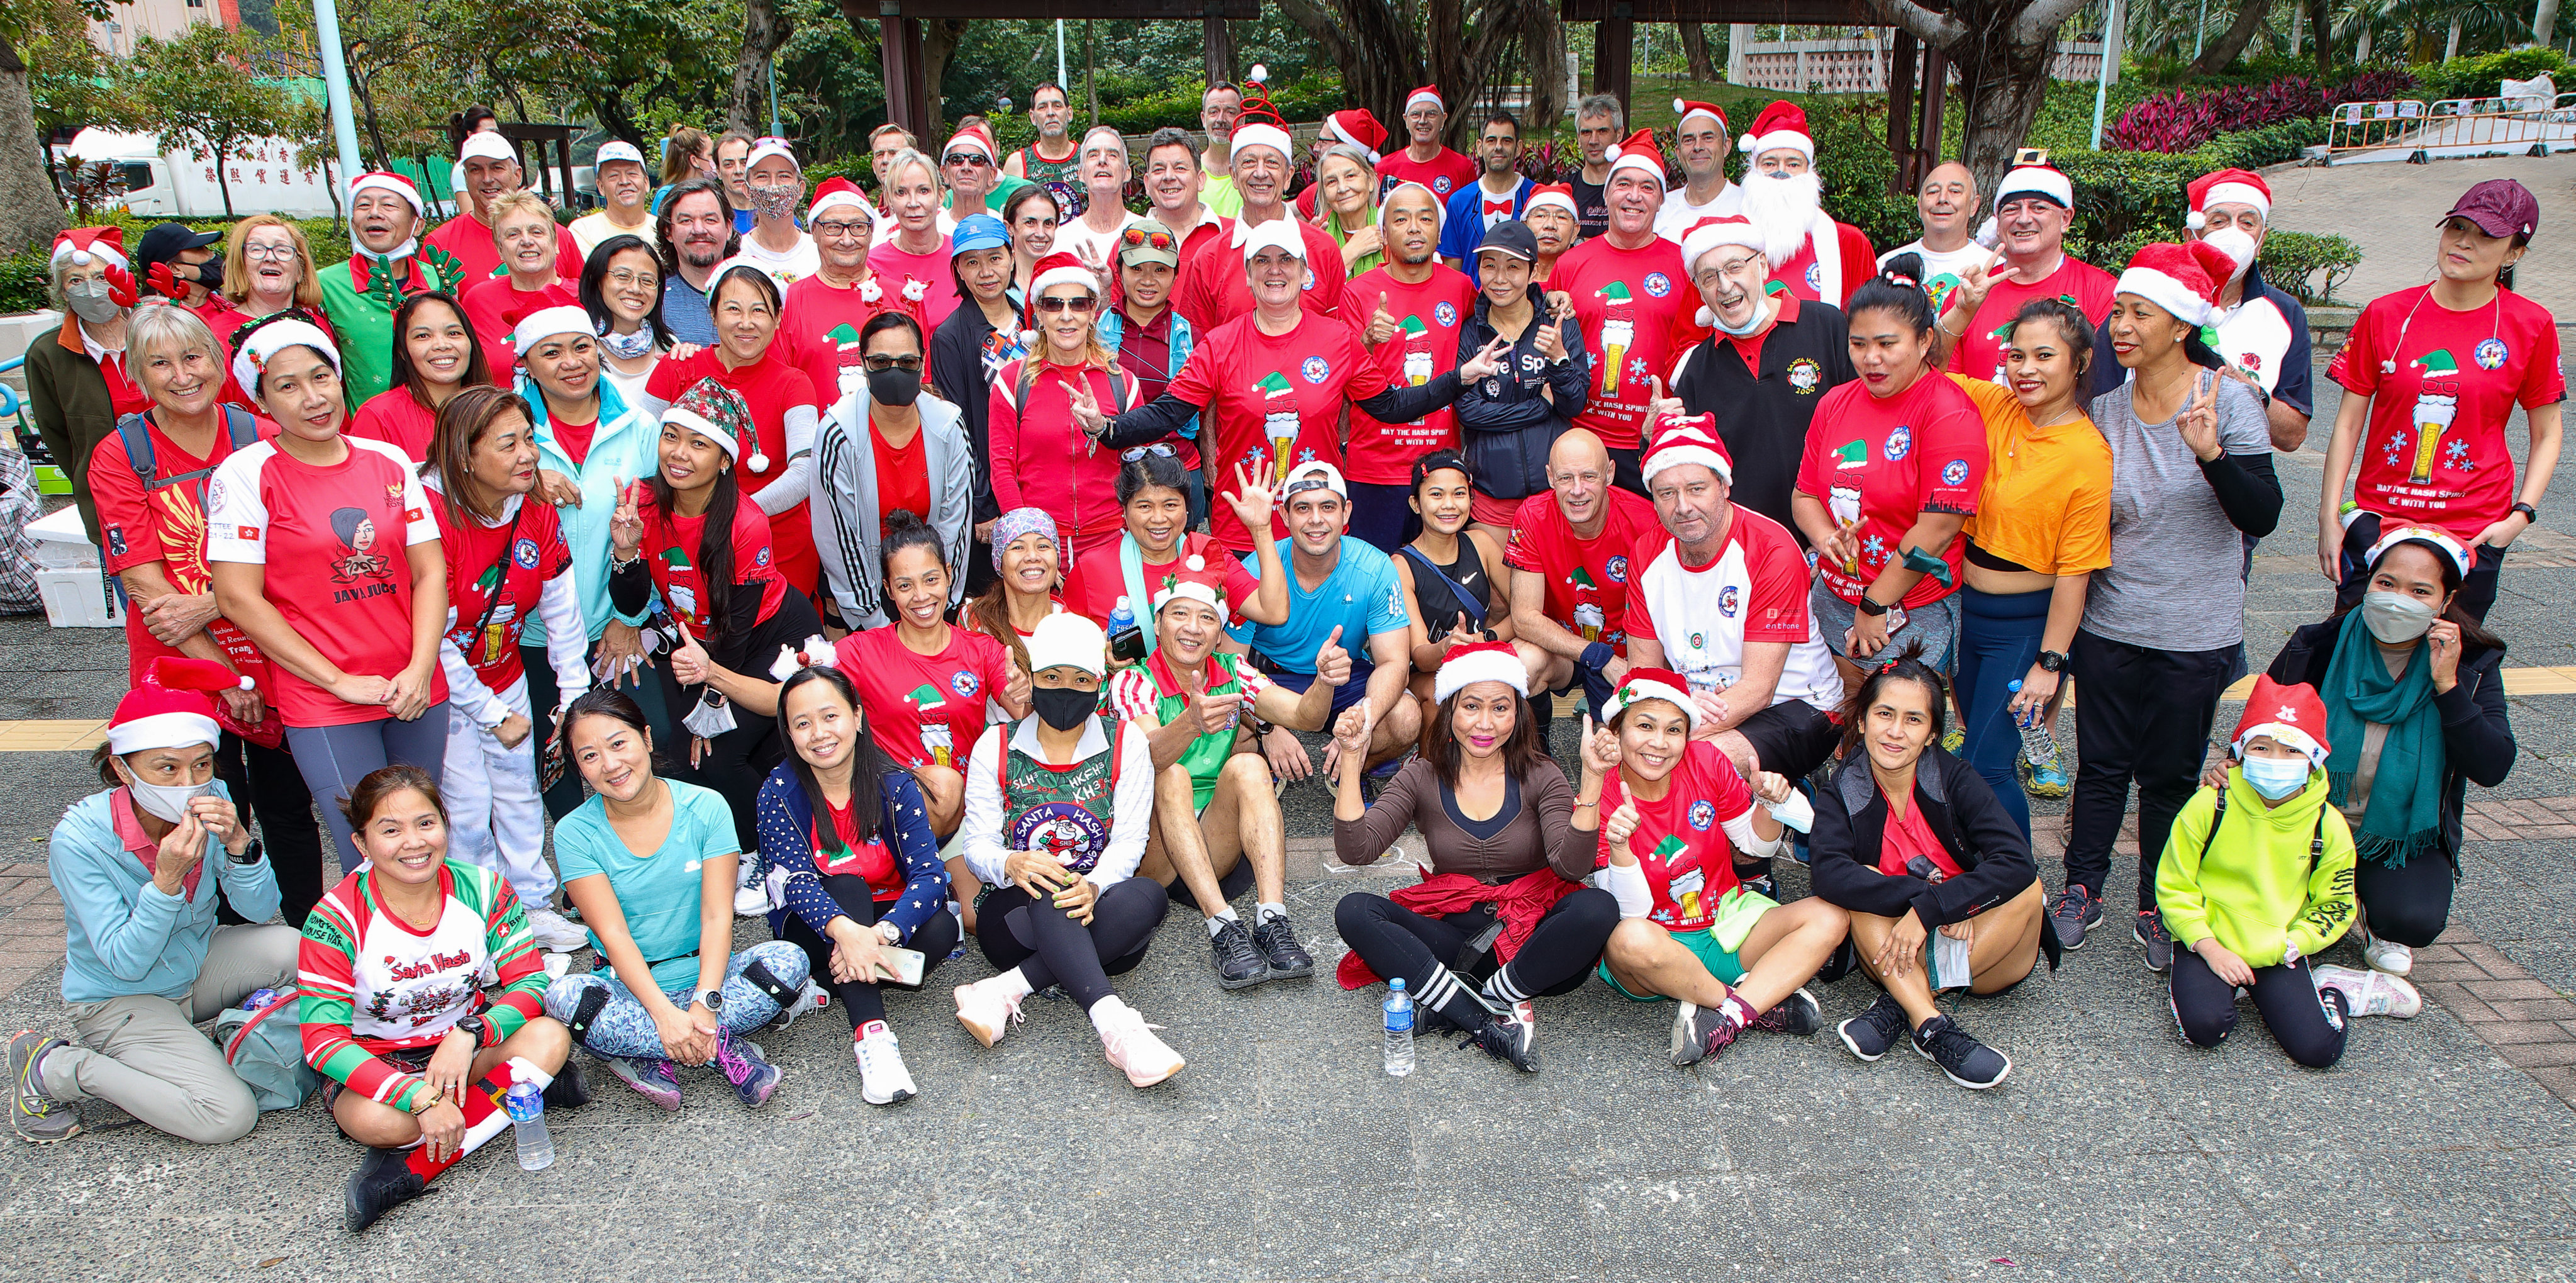 Hong Kong’s Hash House Harriers dress up as Kriss Kringle and run to raise money for charity. Photo: Bharat Khemlani